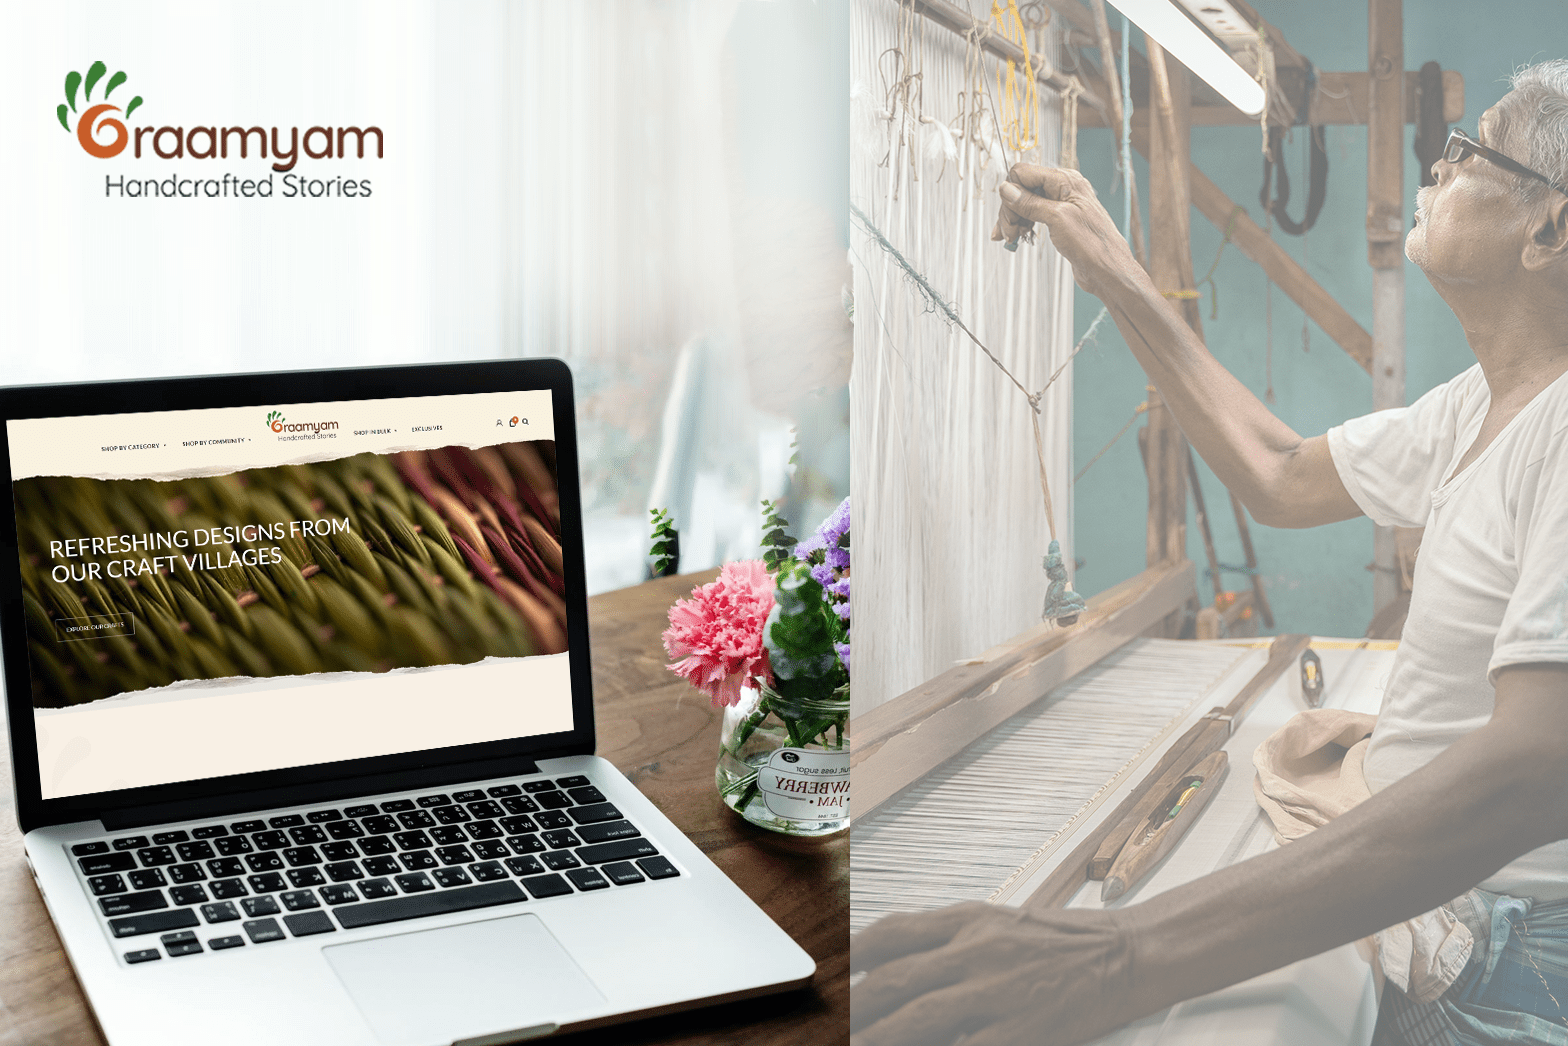 Kerala Handloom & Handcrafted Collections are Now Just a Click Away!